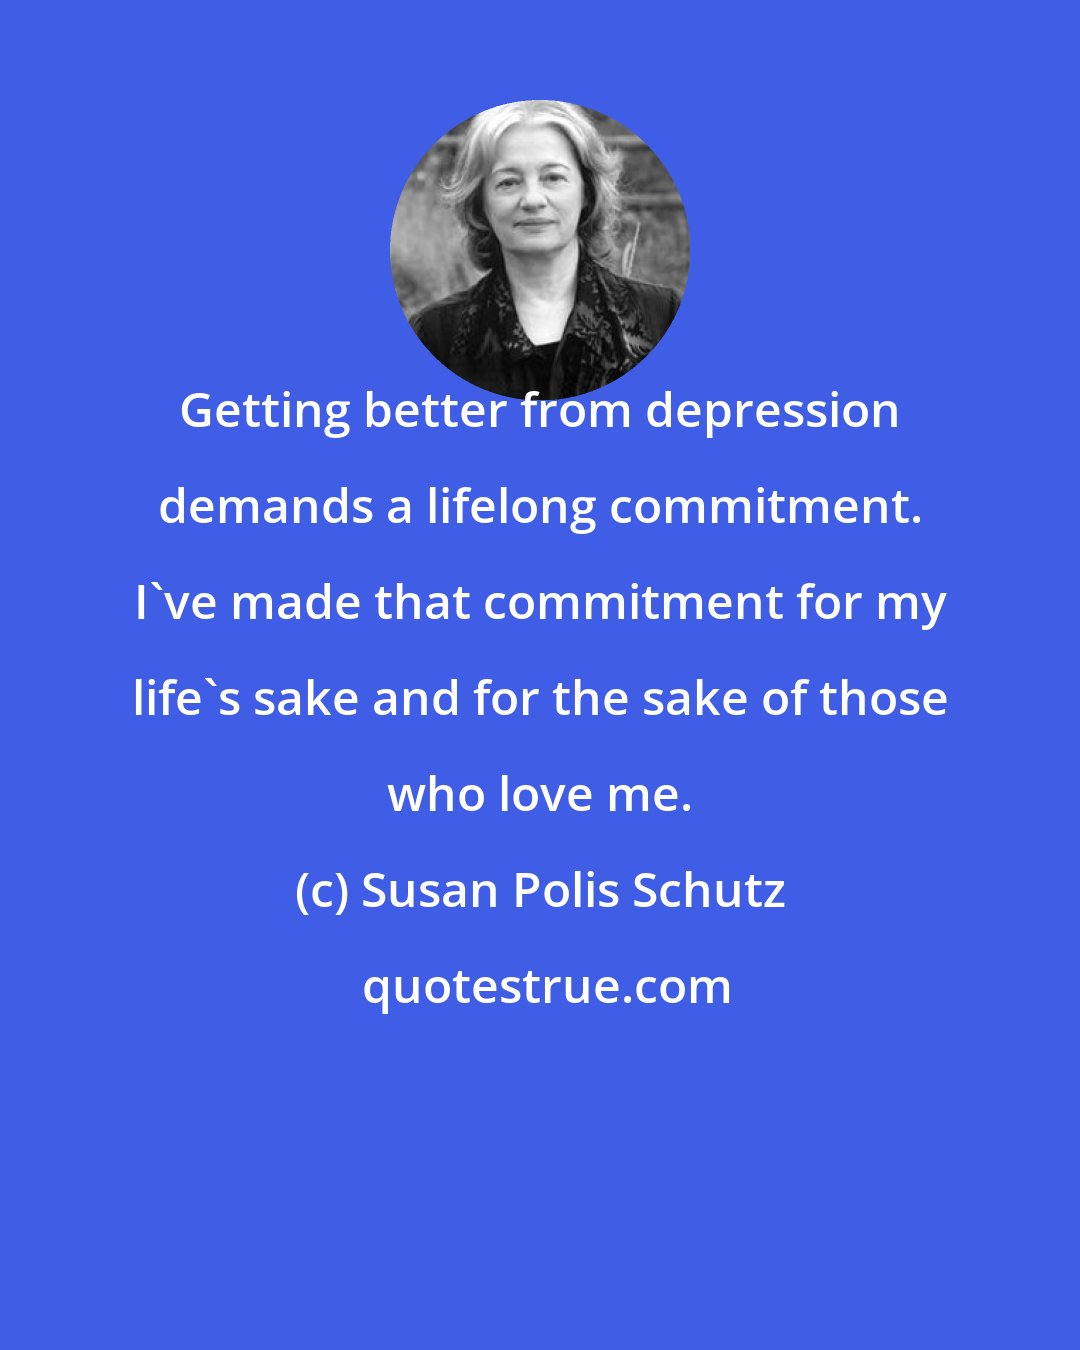 Susan Polis Schutz: Getting better from depression demands a lifelong commitment. I've made that commitment for my life's sake and for the sake of those who love me.